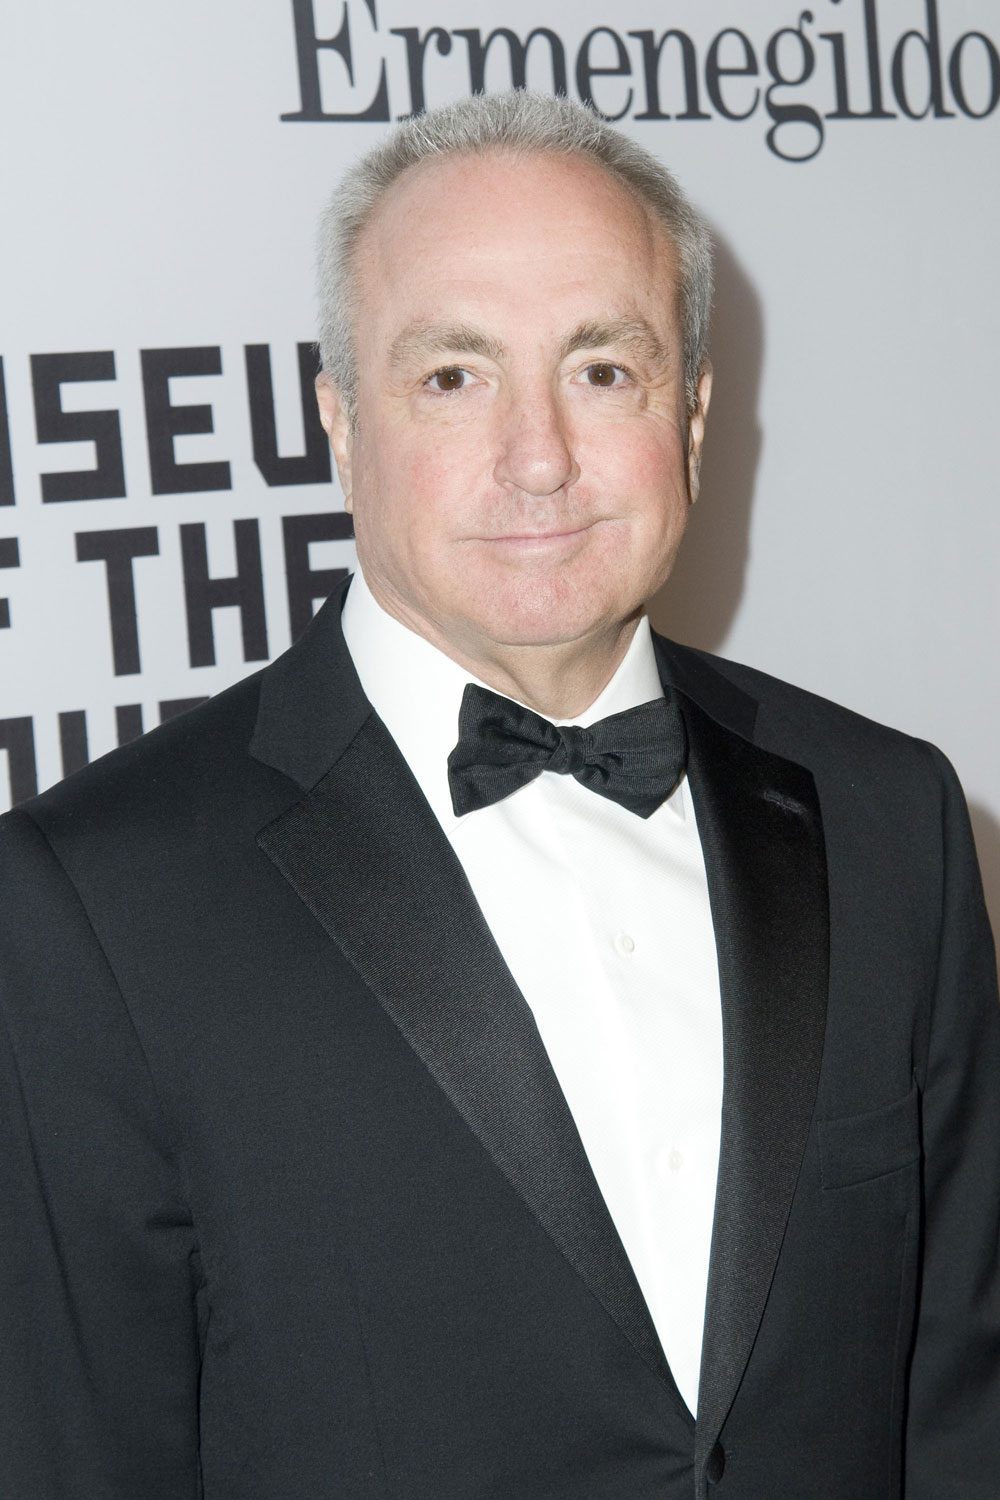 Lorne Michaels Unsure About The Future Of ‘SNL’